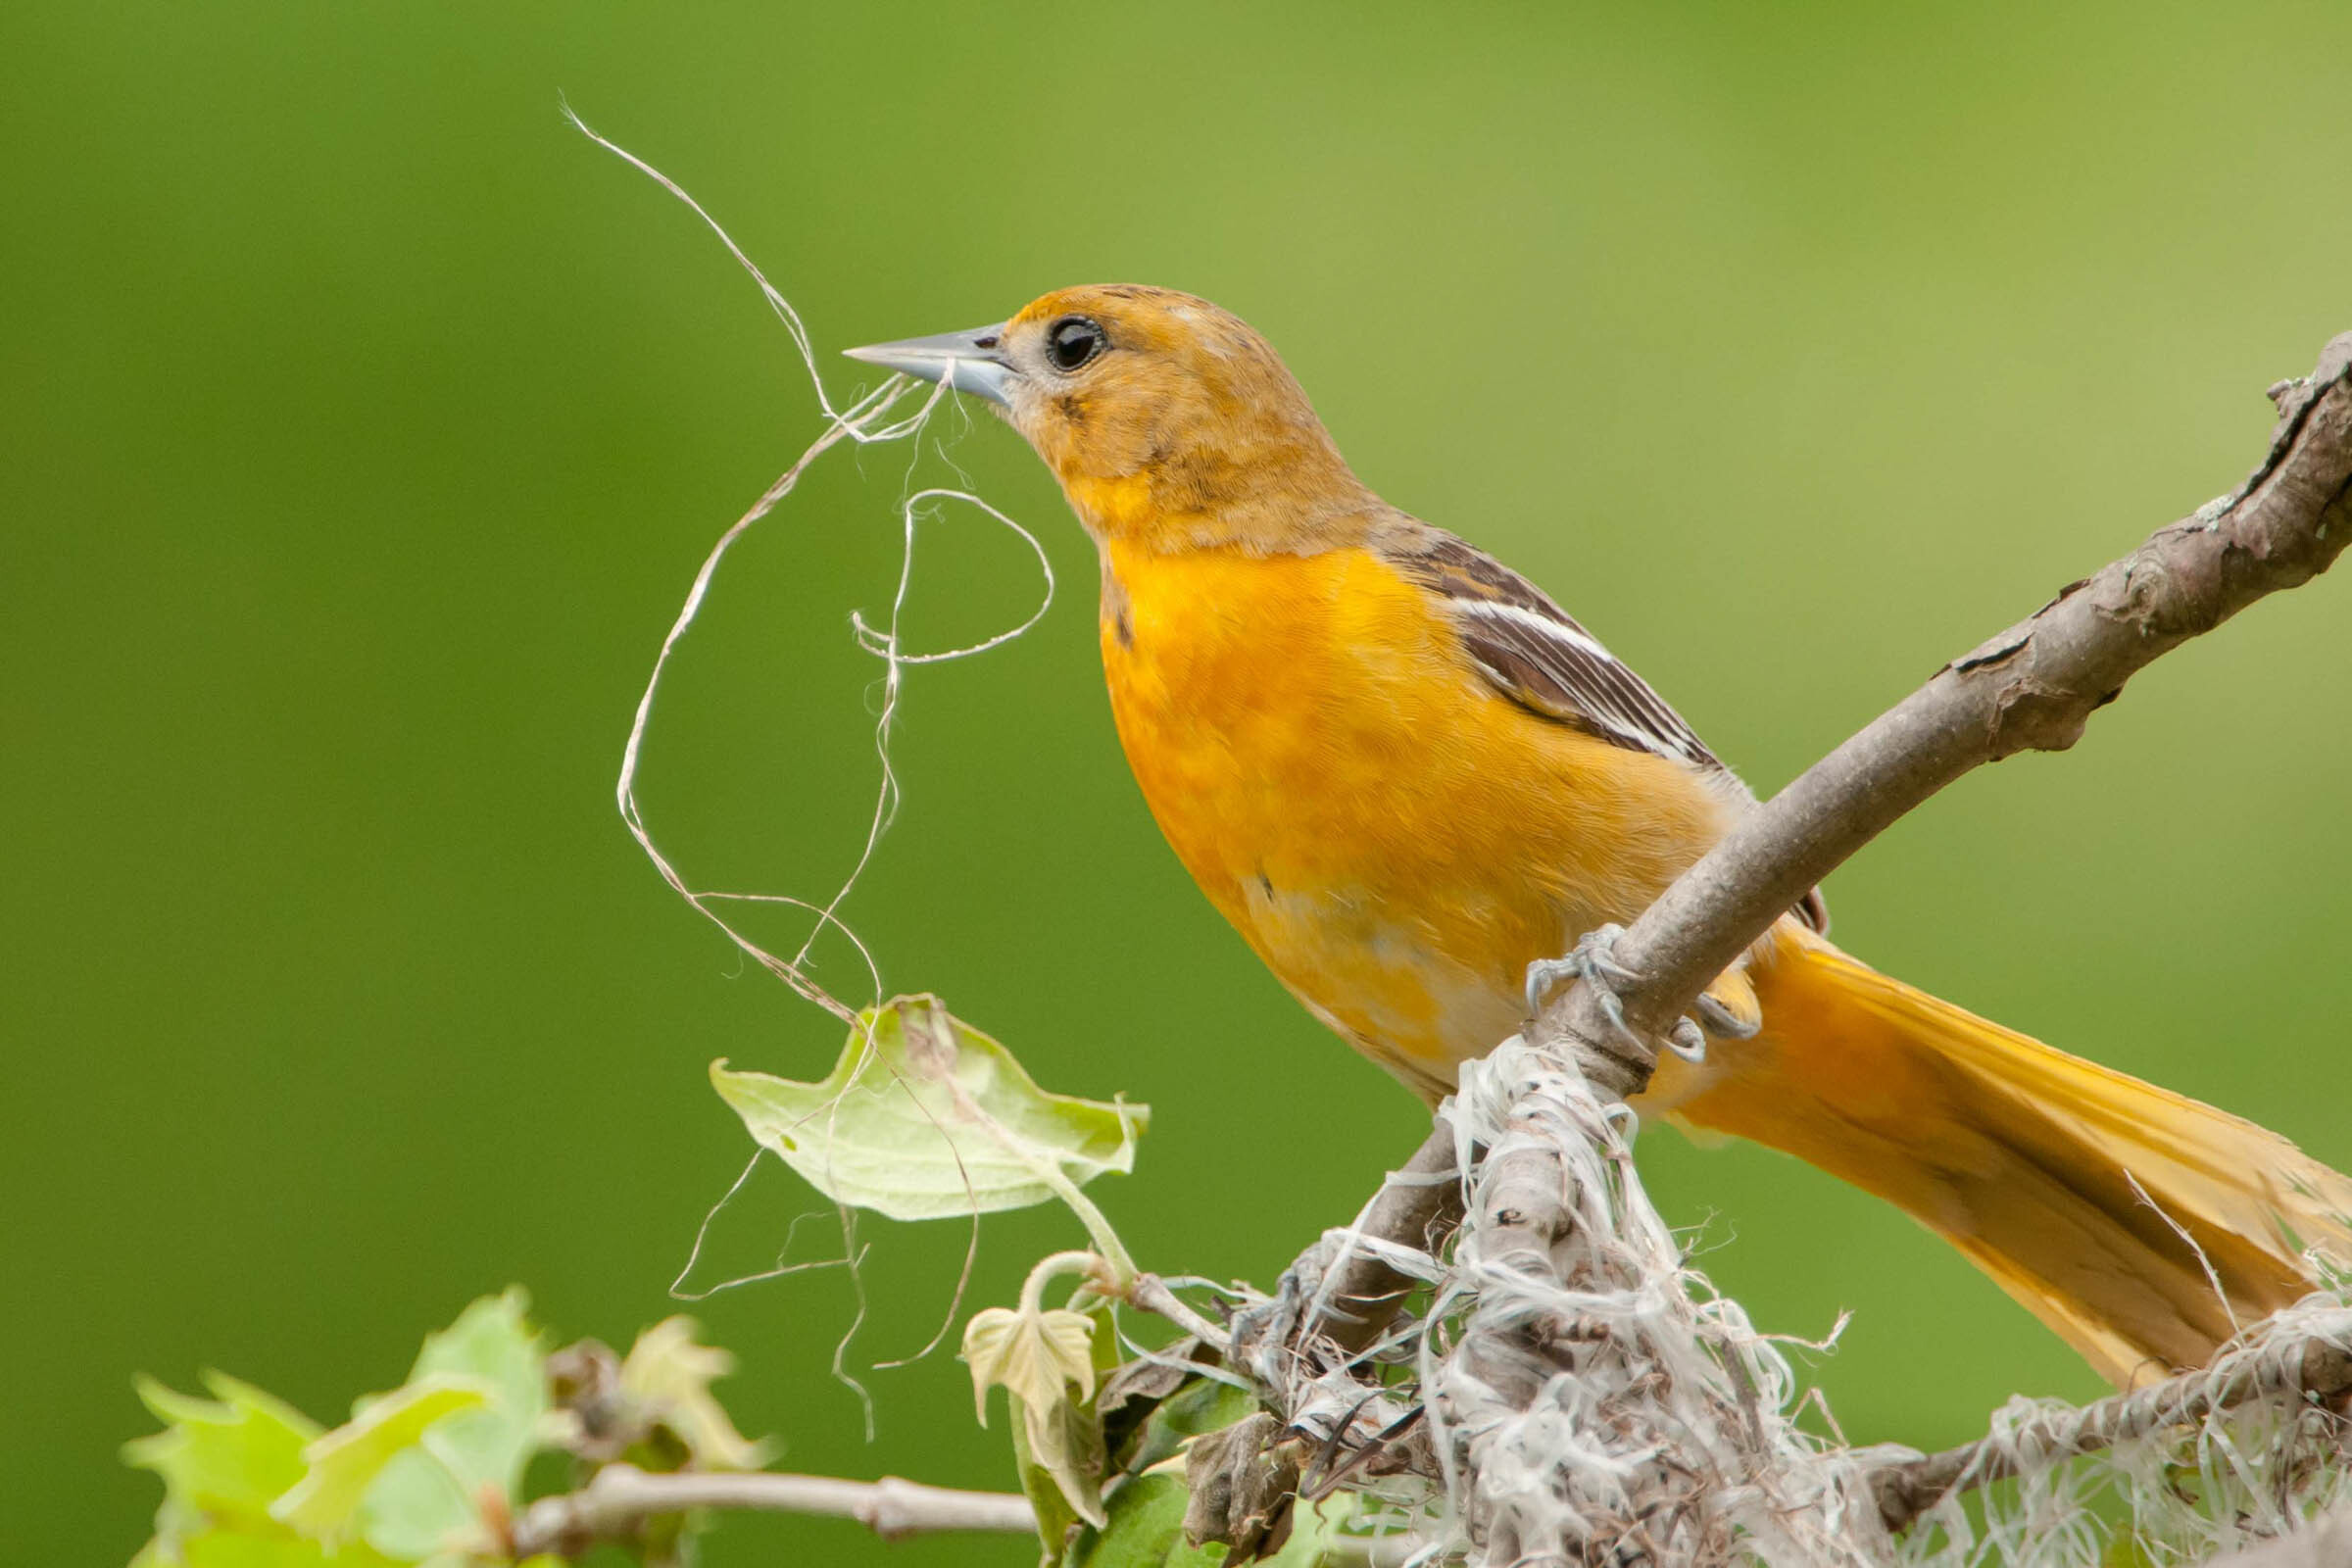 Baltimore Orioles breed on the grounds of Wave Hill. (Here, a female gathers nesting material that she will weave into her hanging nest.) Photo: Mark Boyd/Audubon Photography Awards